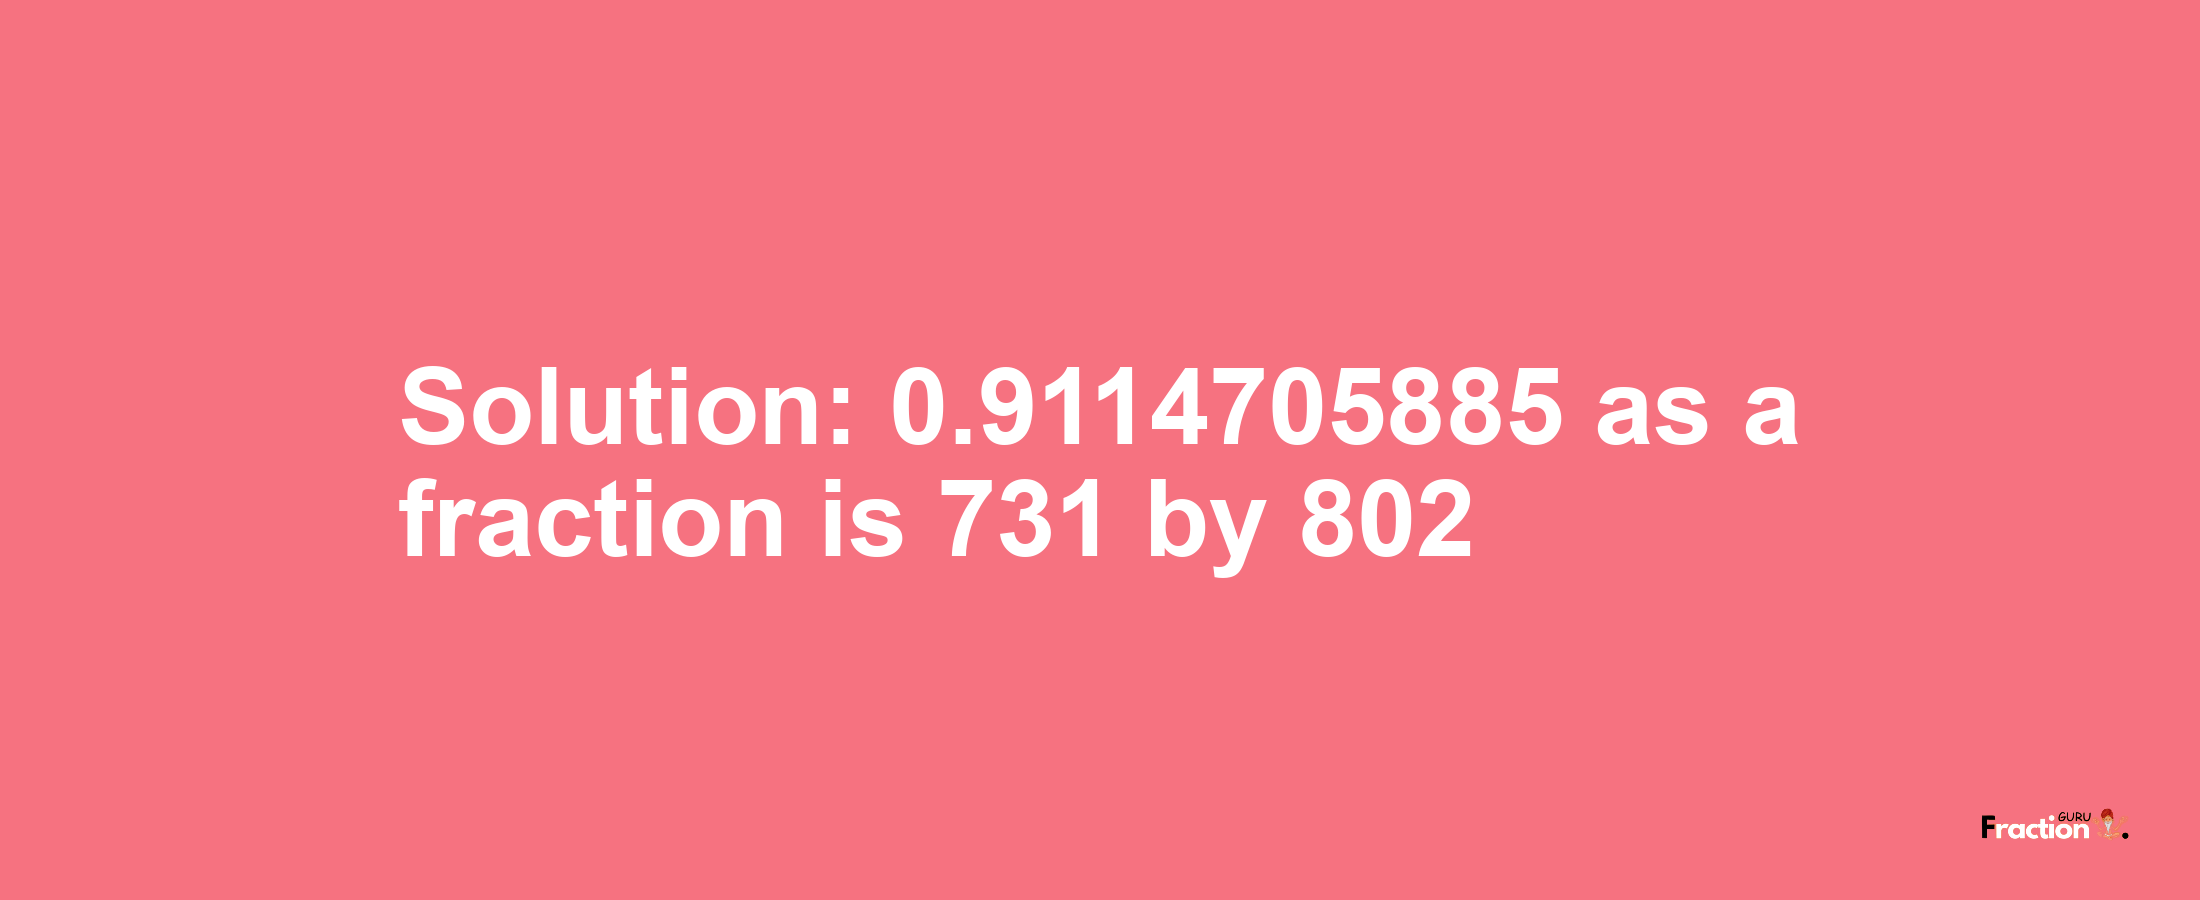 Solution:0.9114705885 as a fraction is 731/802